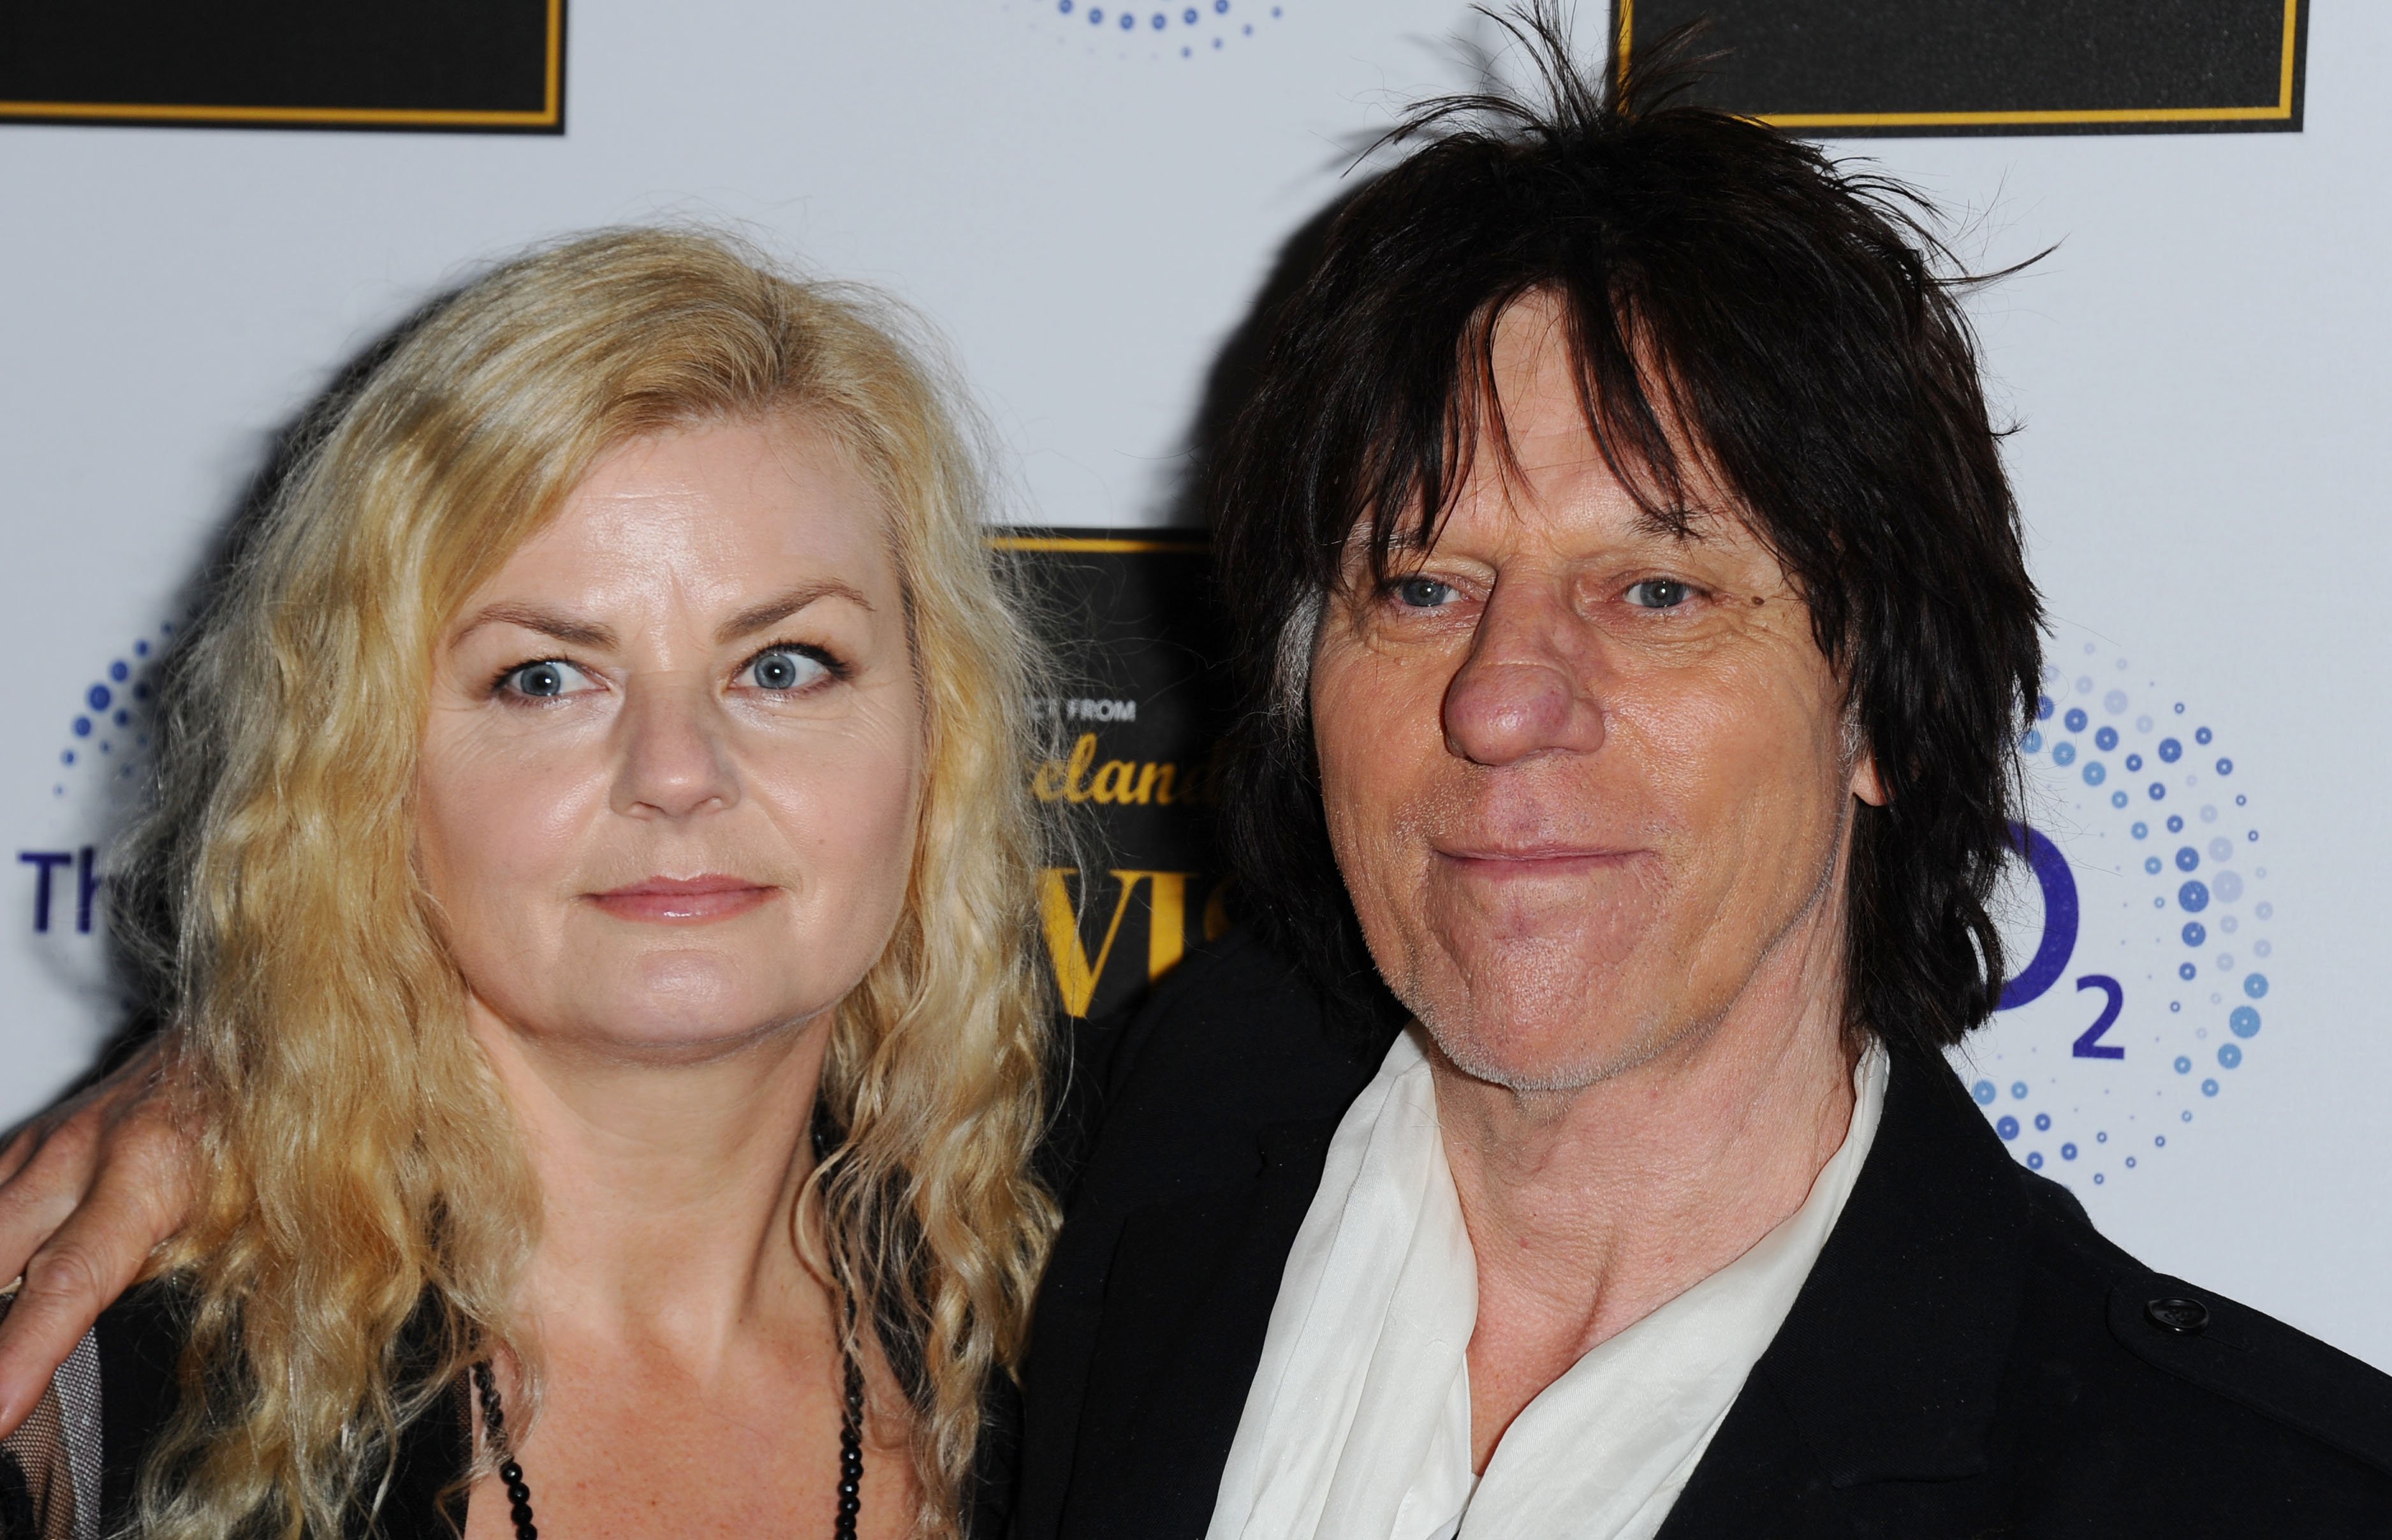 Sandra Cash and Jeff Beck are pictured at the 'Elvis at the 02' exhibition at 02 Arena on December 15, 2014, in London, England | Source: Getty Images